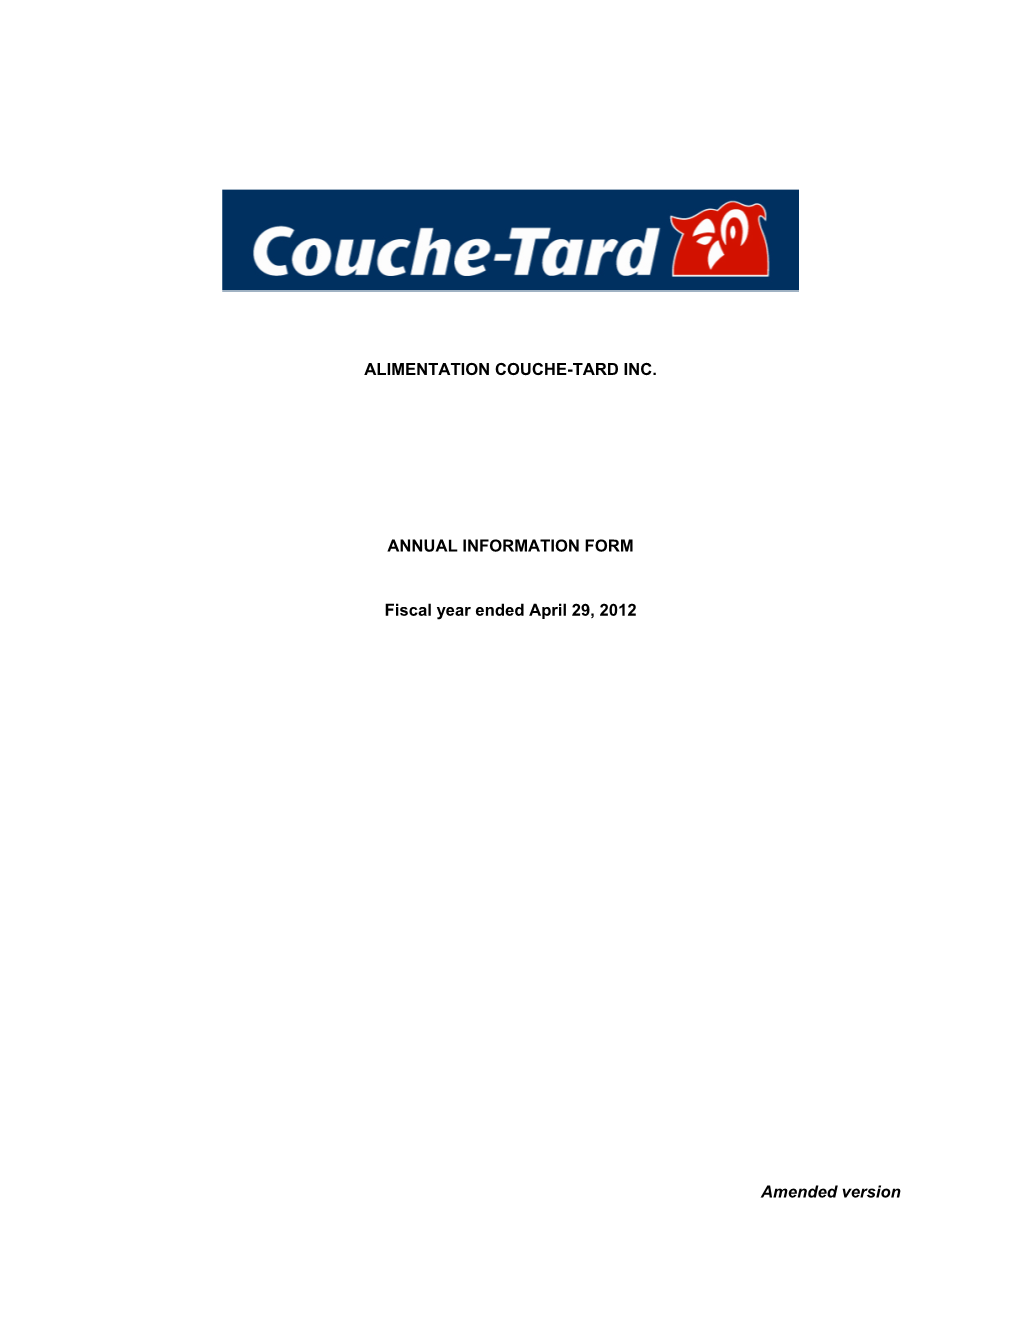 Alimentation Couche-Tard Inc. Annual Information